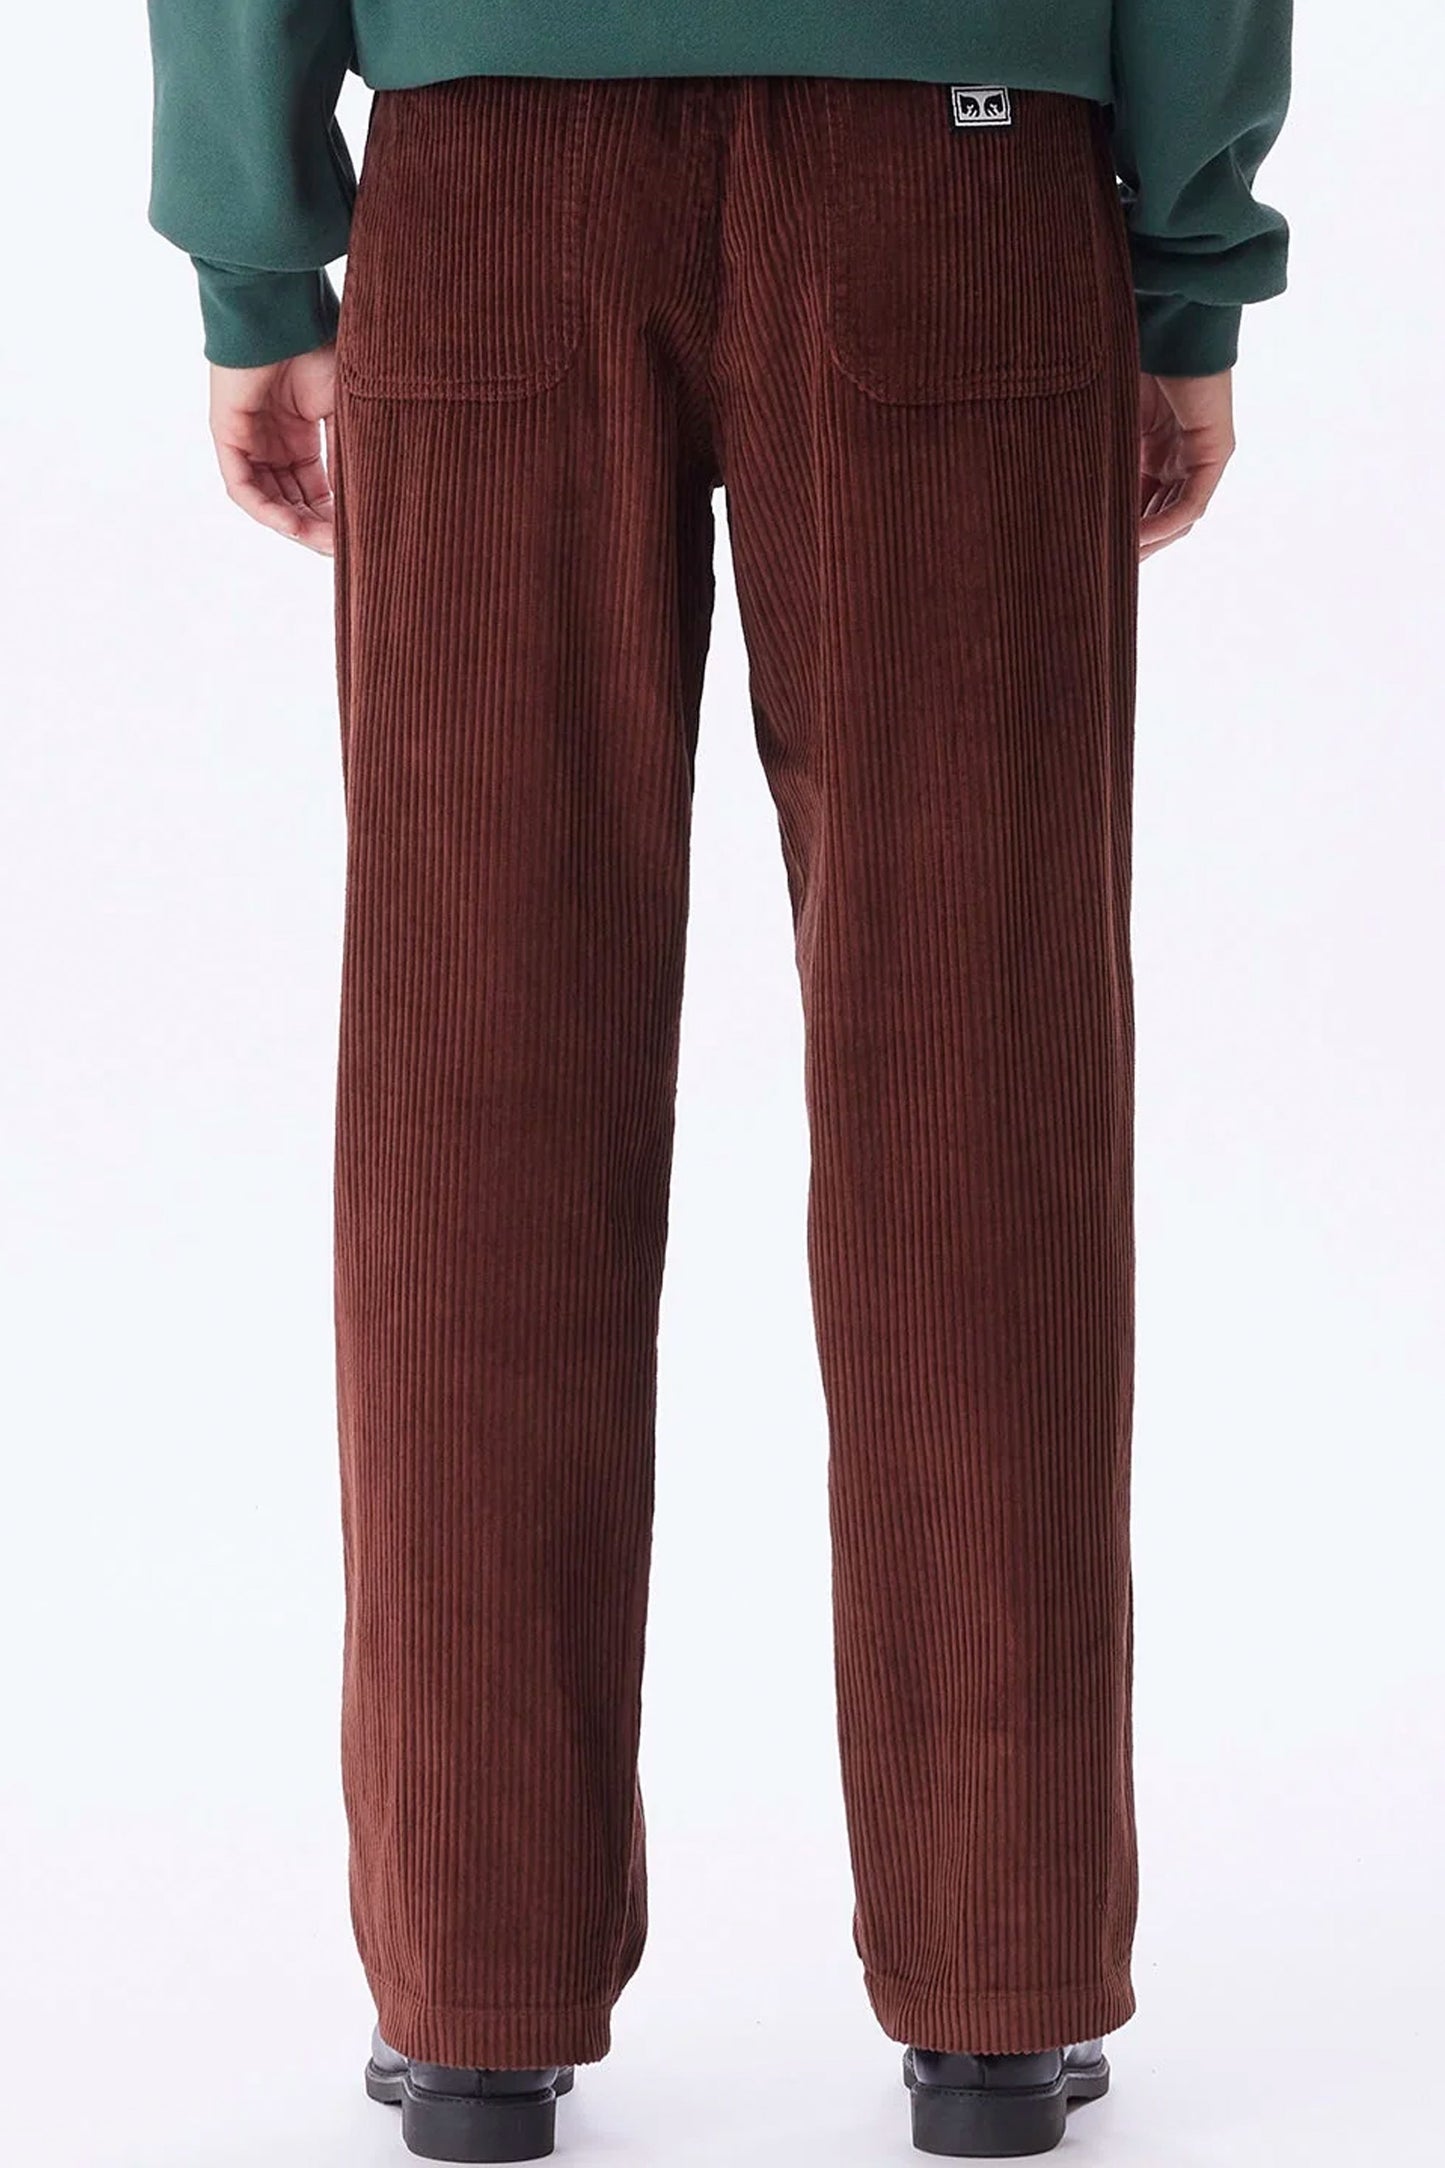 Pukas-Surf-Shop-Obey-Pants-Easy-Cord-Sepia